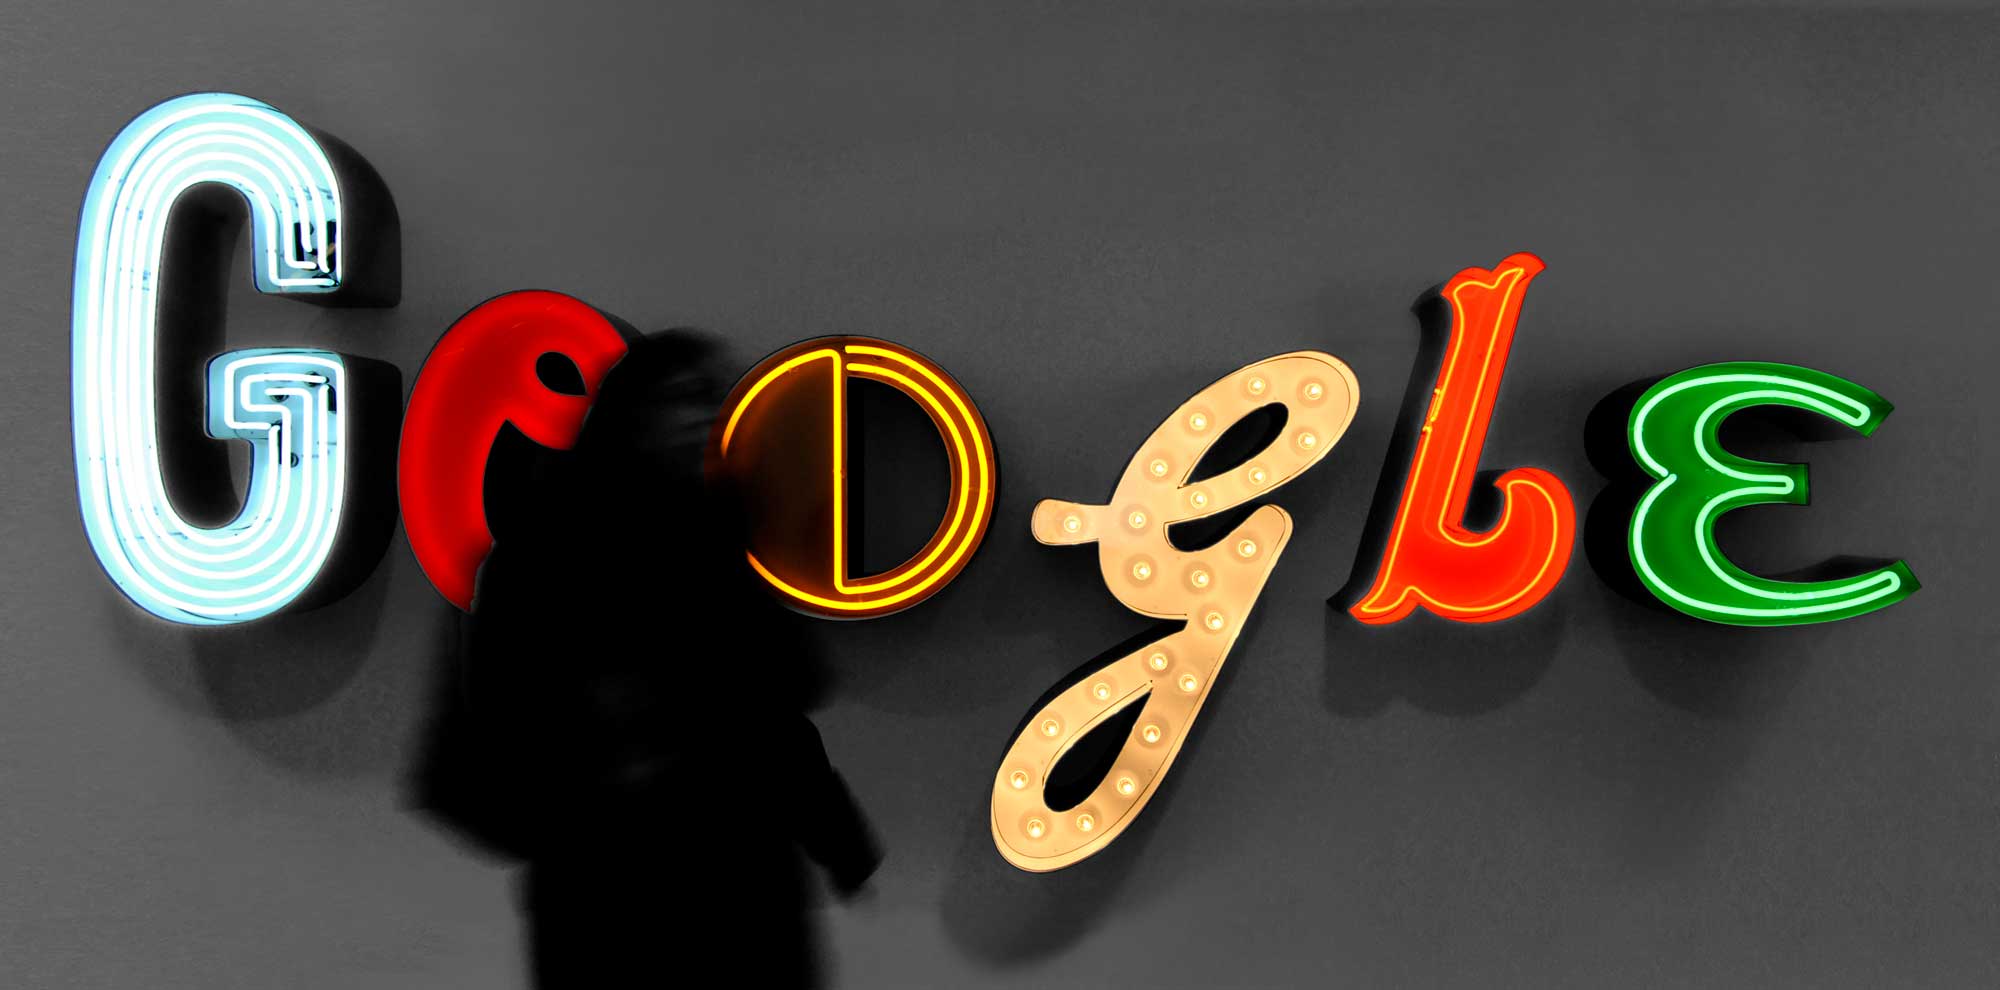 Neon Google sign for the Google Doodle project